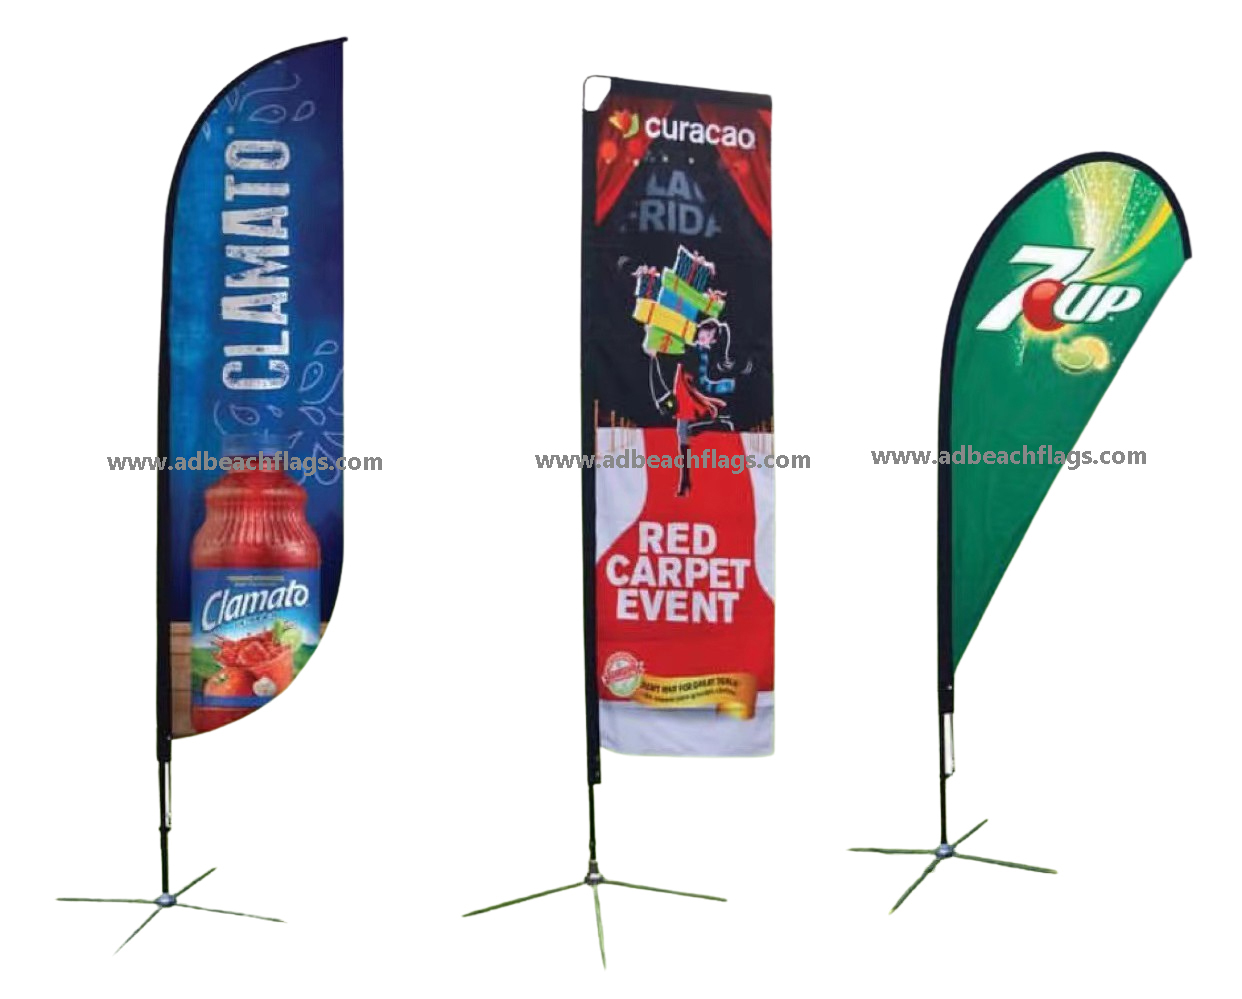 beach flags, advertising flags, custom flags with different shapes: teardrop flag, rectangle flag, feather flag, etc